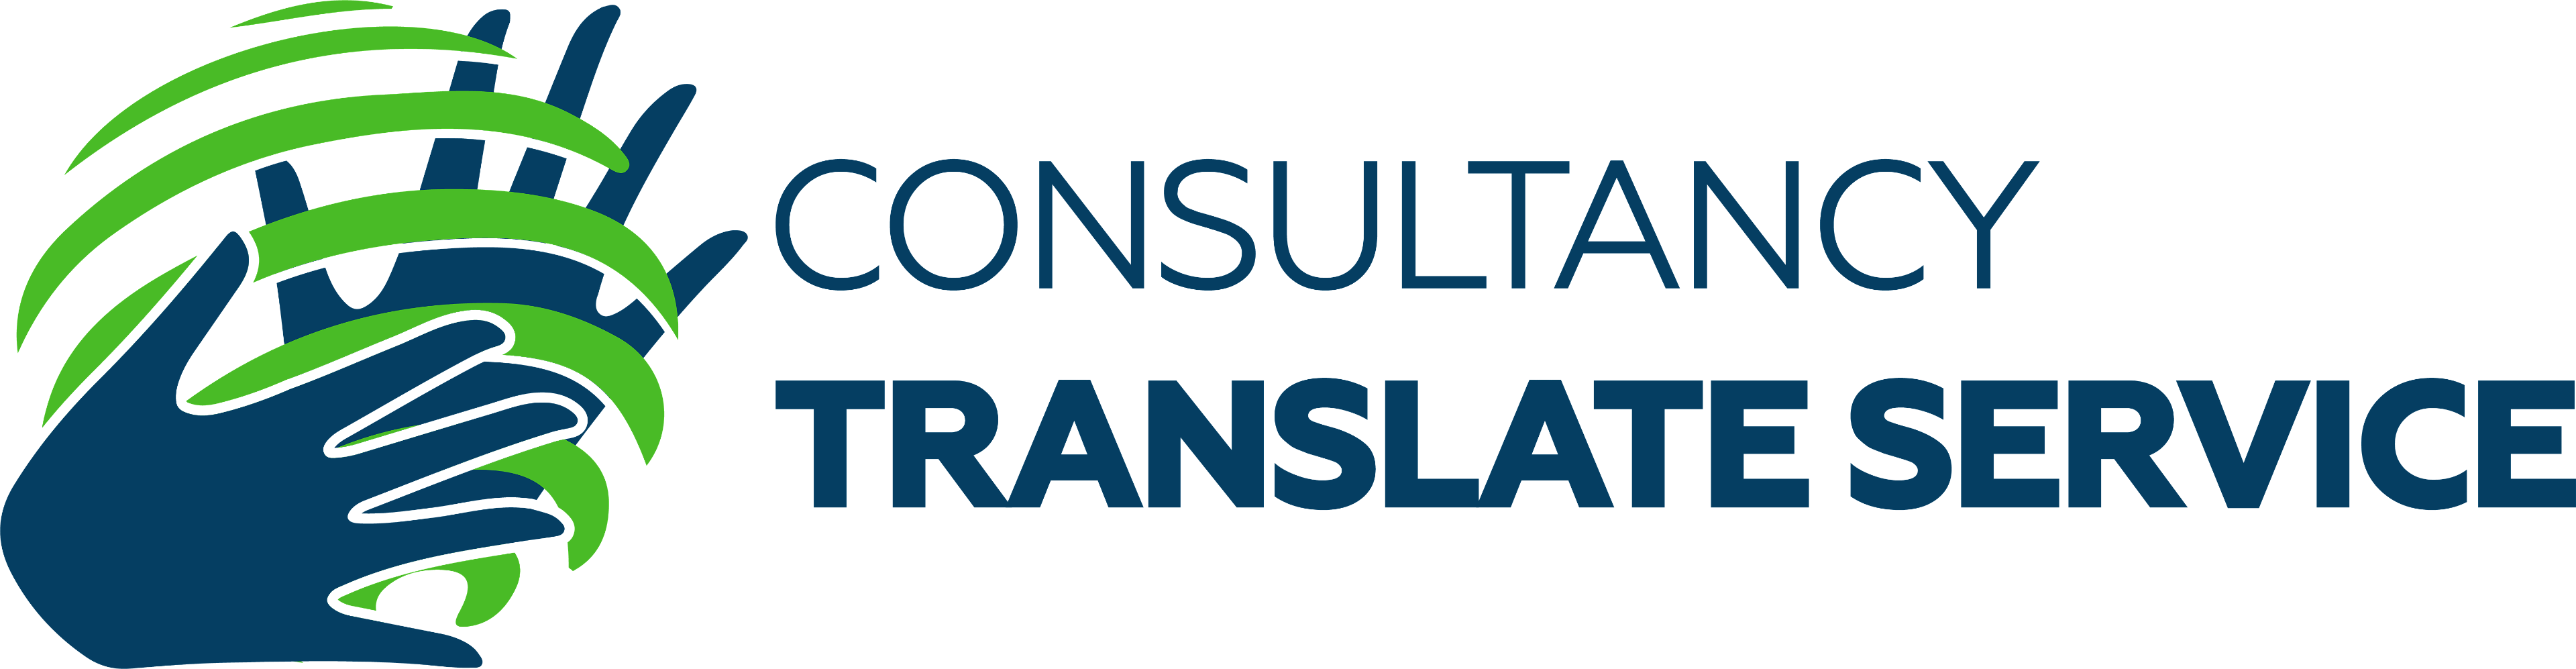 Ct Consultancy & Translation Services logo